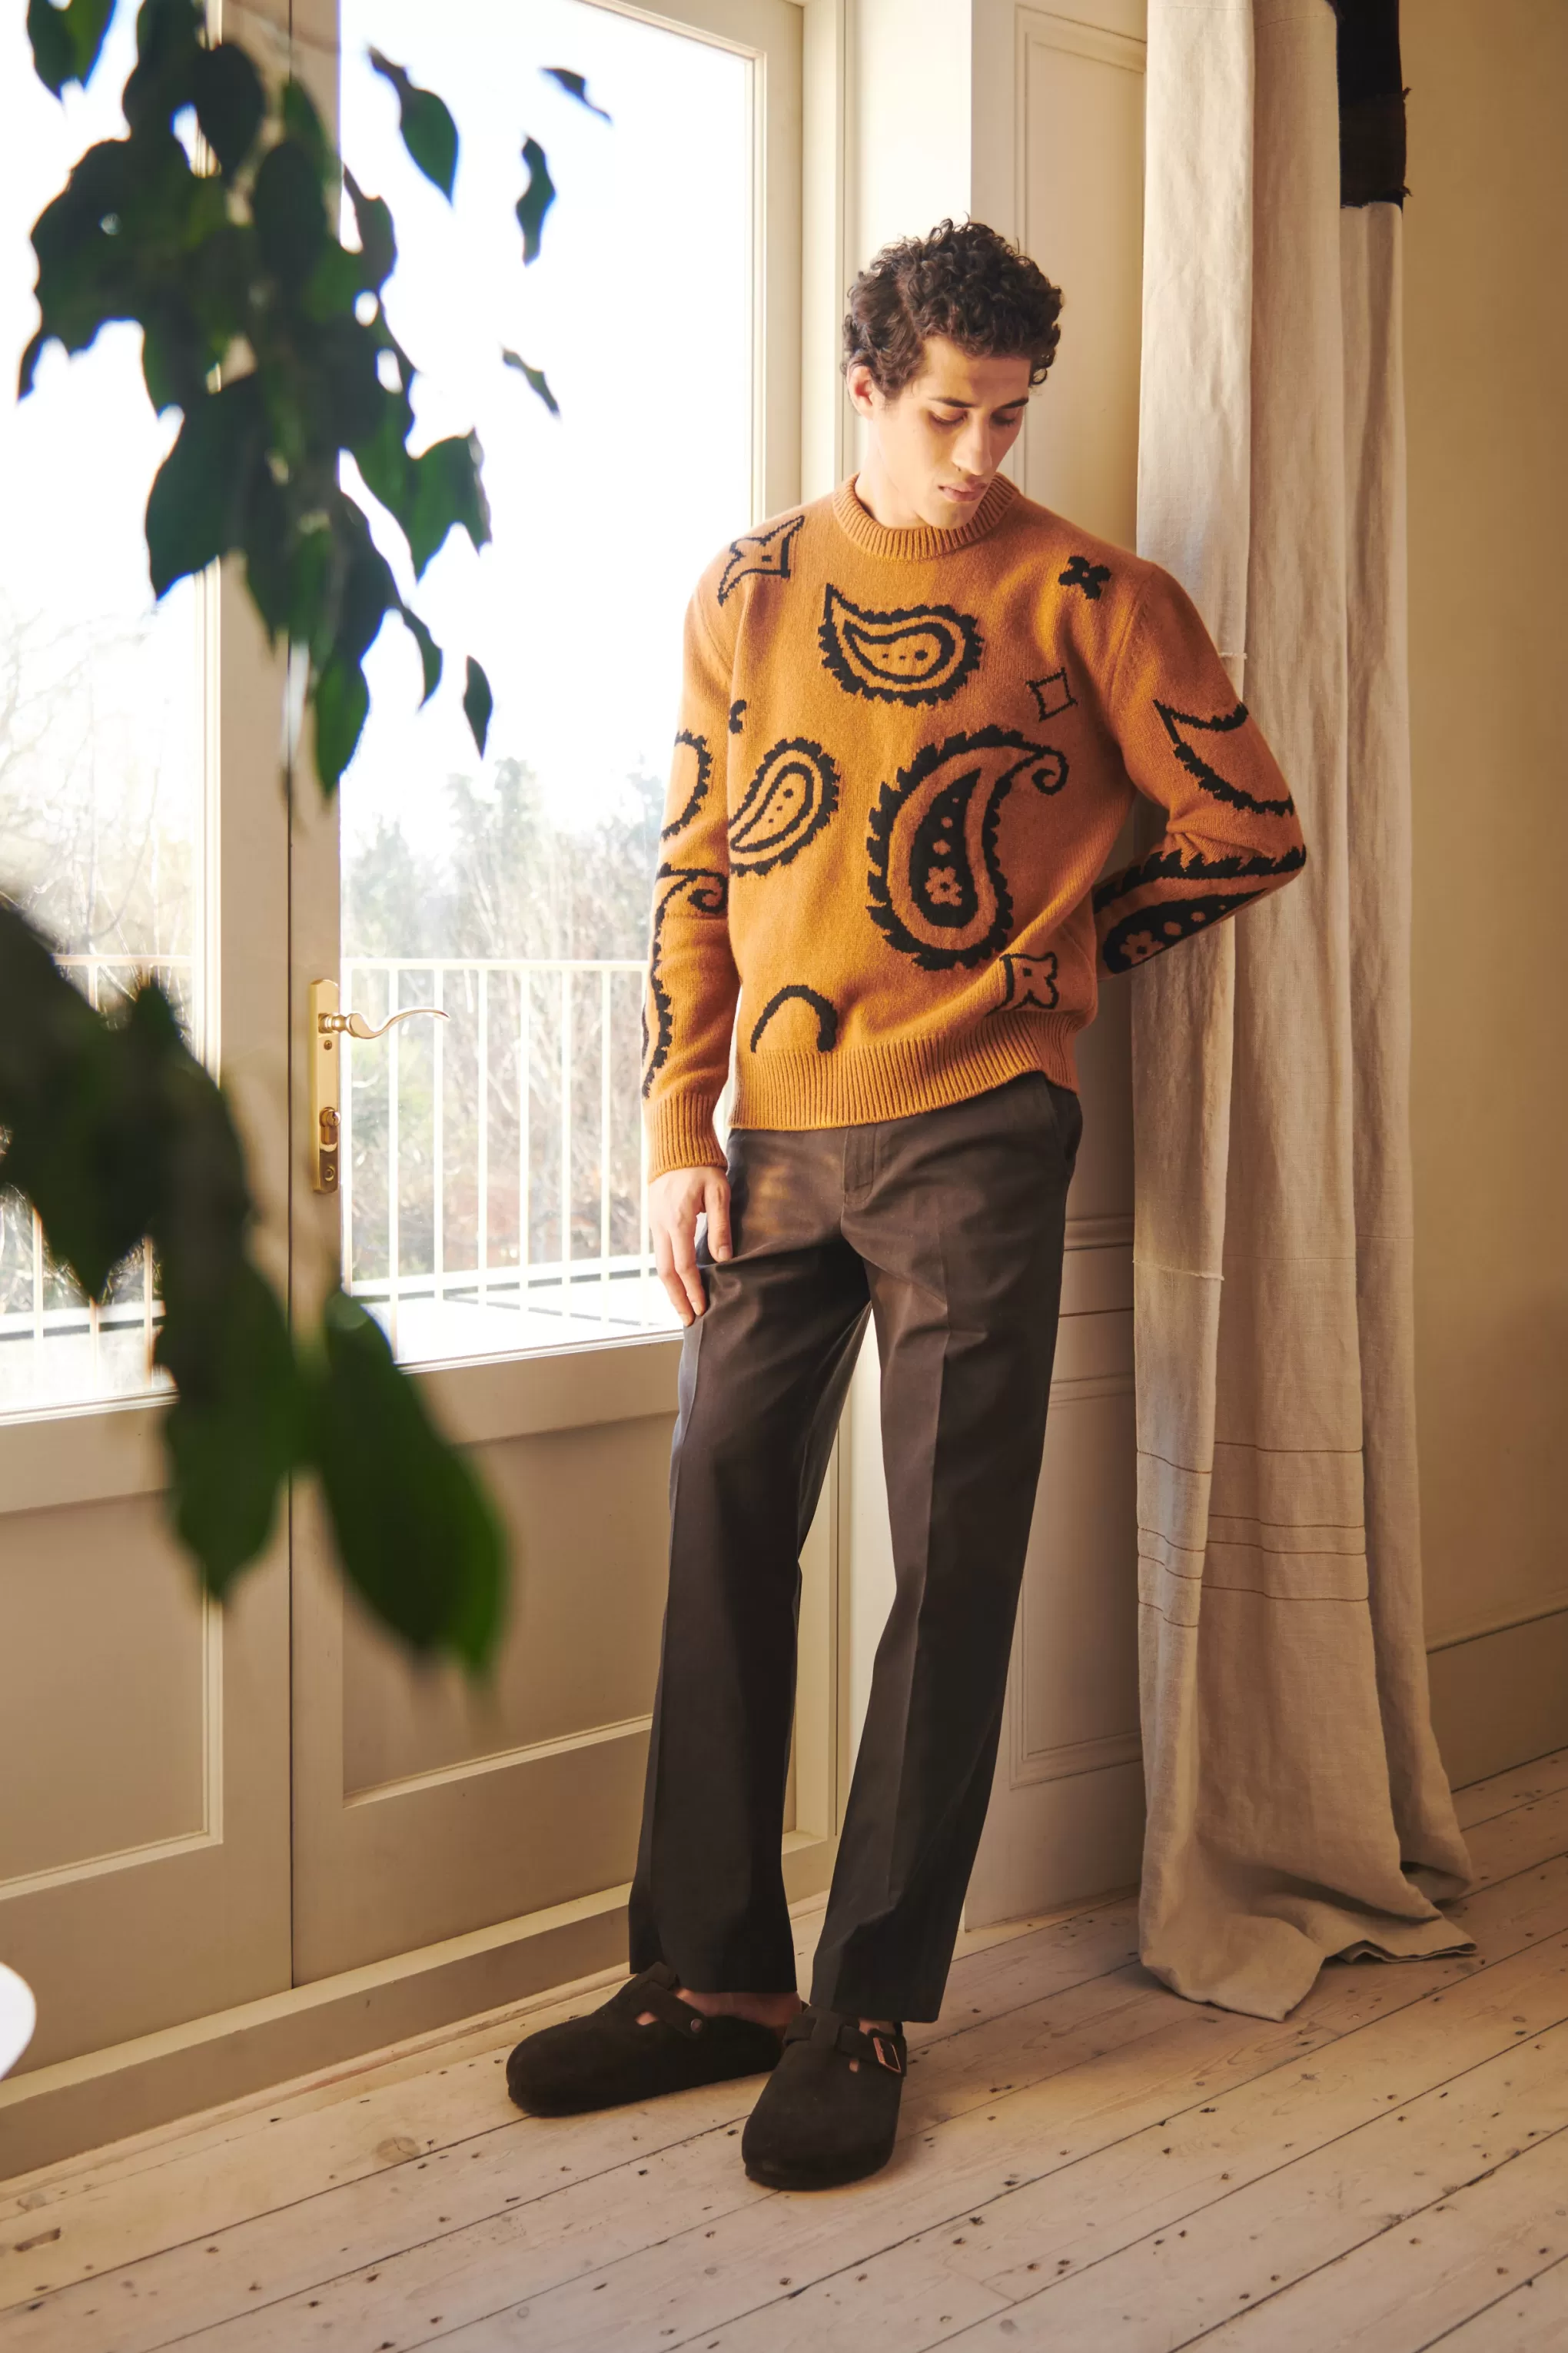 Cheap Lambswool Round Neck Jumper With Exploded Paisley Intarsia Pattern In Vicuna And Black Men Loungewear